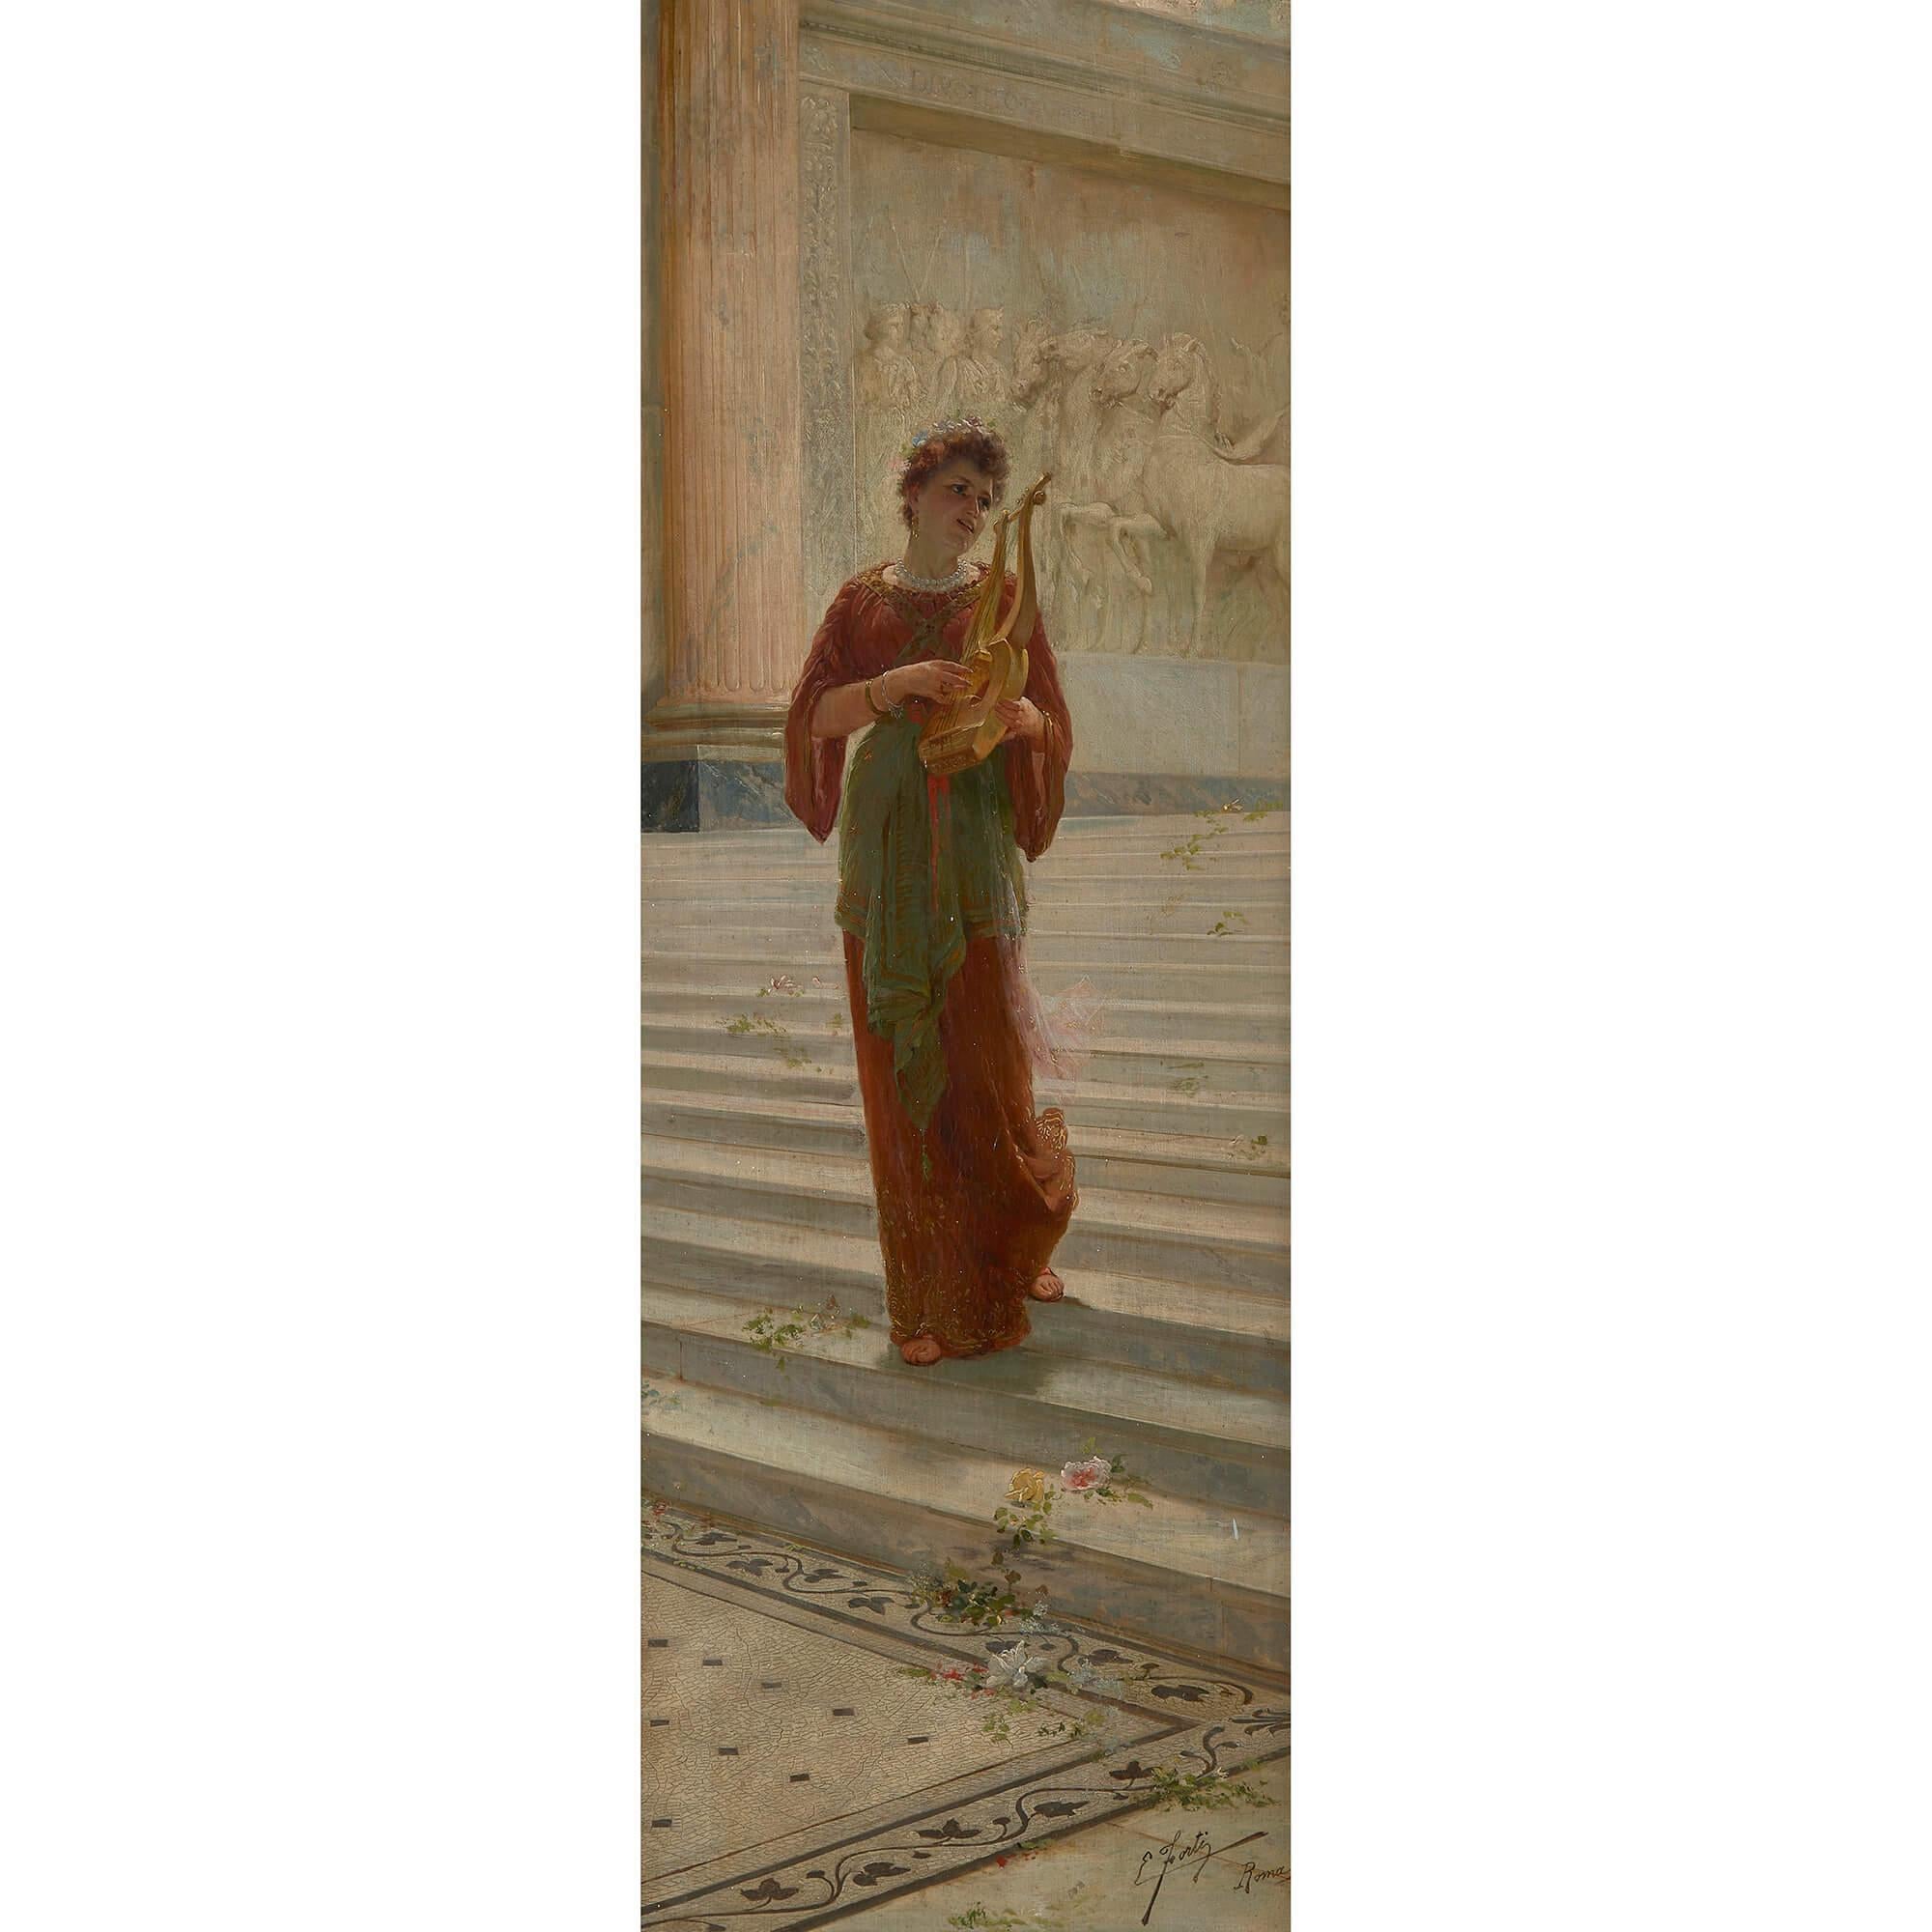 A painting of Sappho by Ettore Forti - Painting by Edoardo Ettore Forti